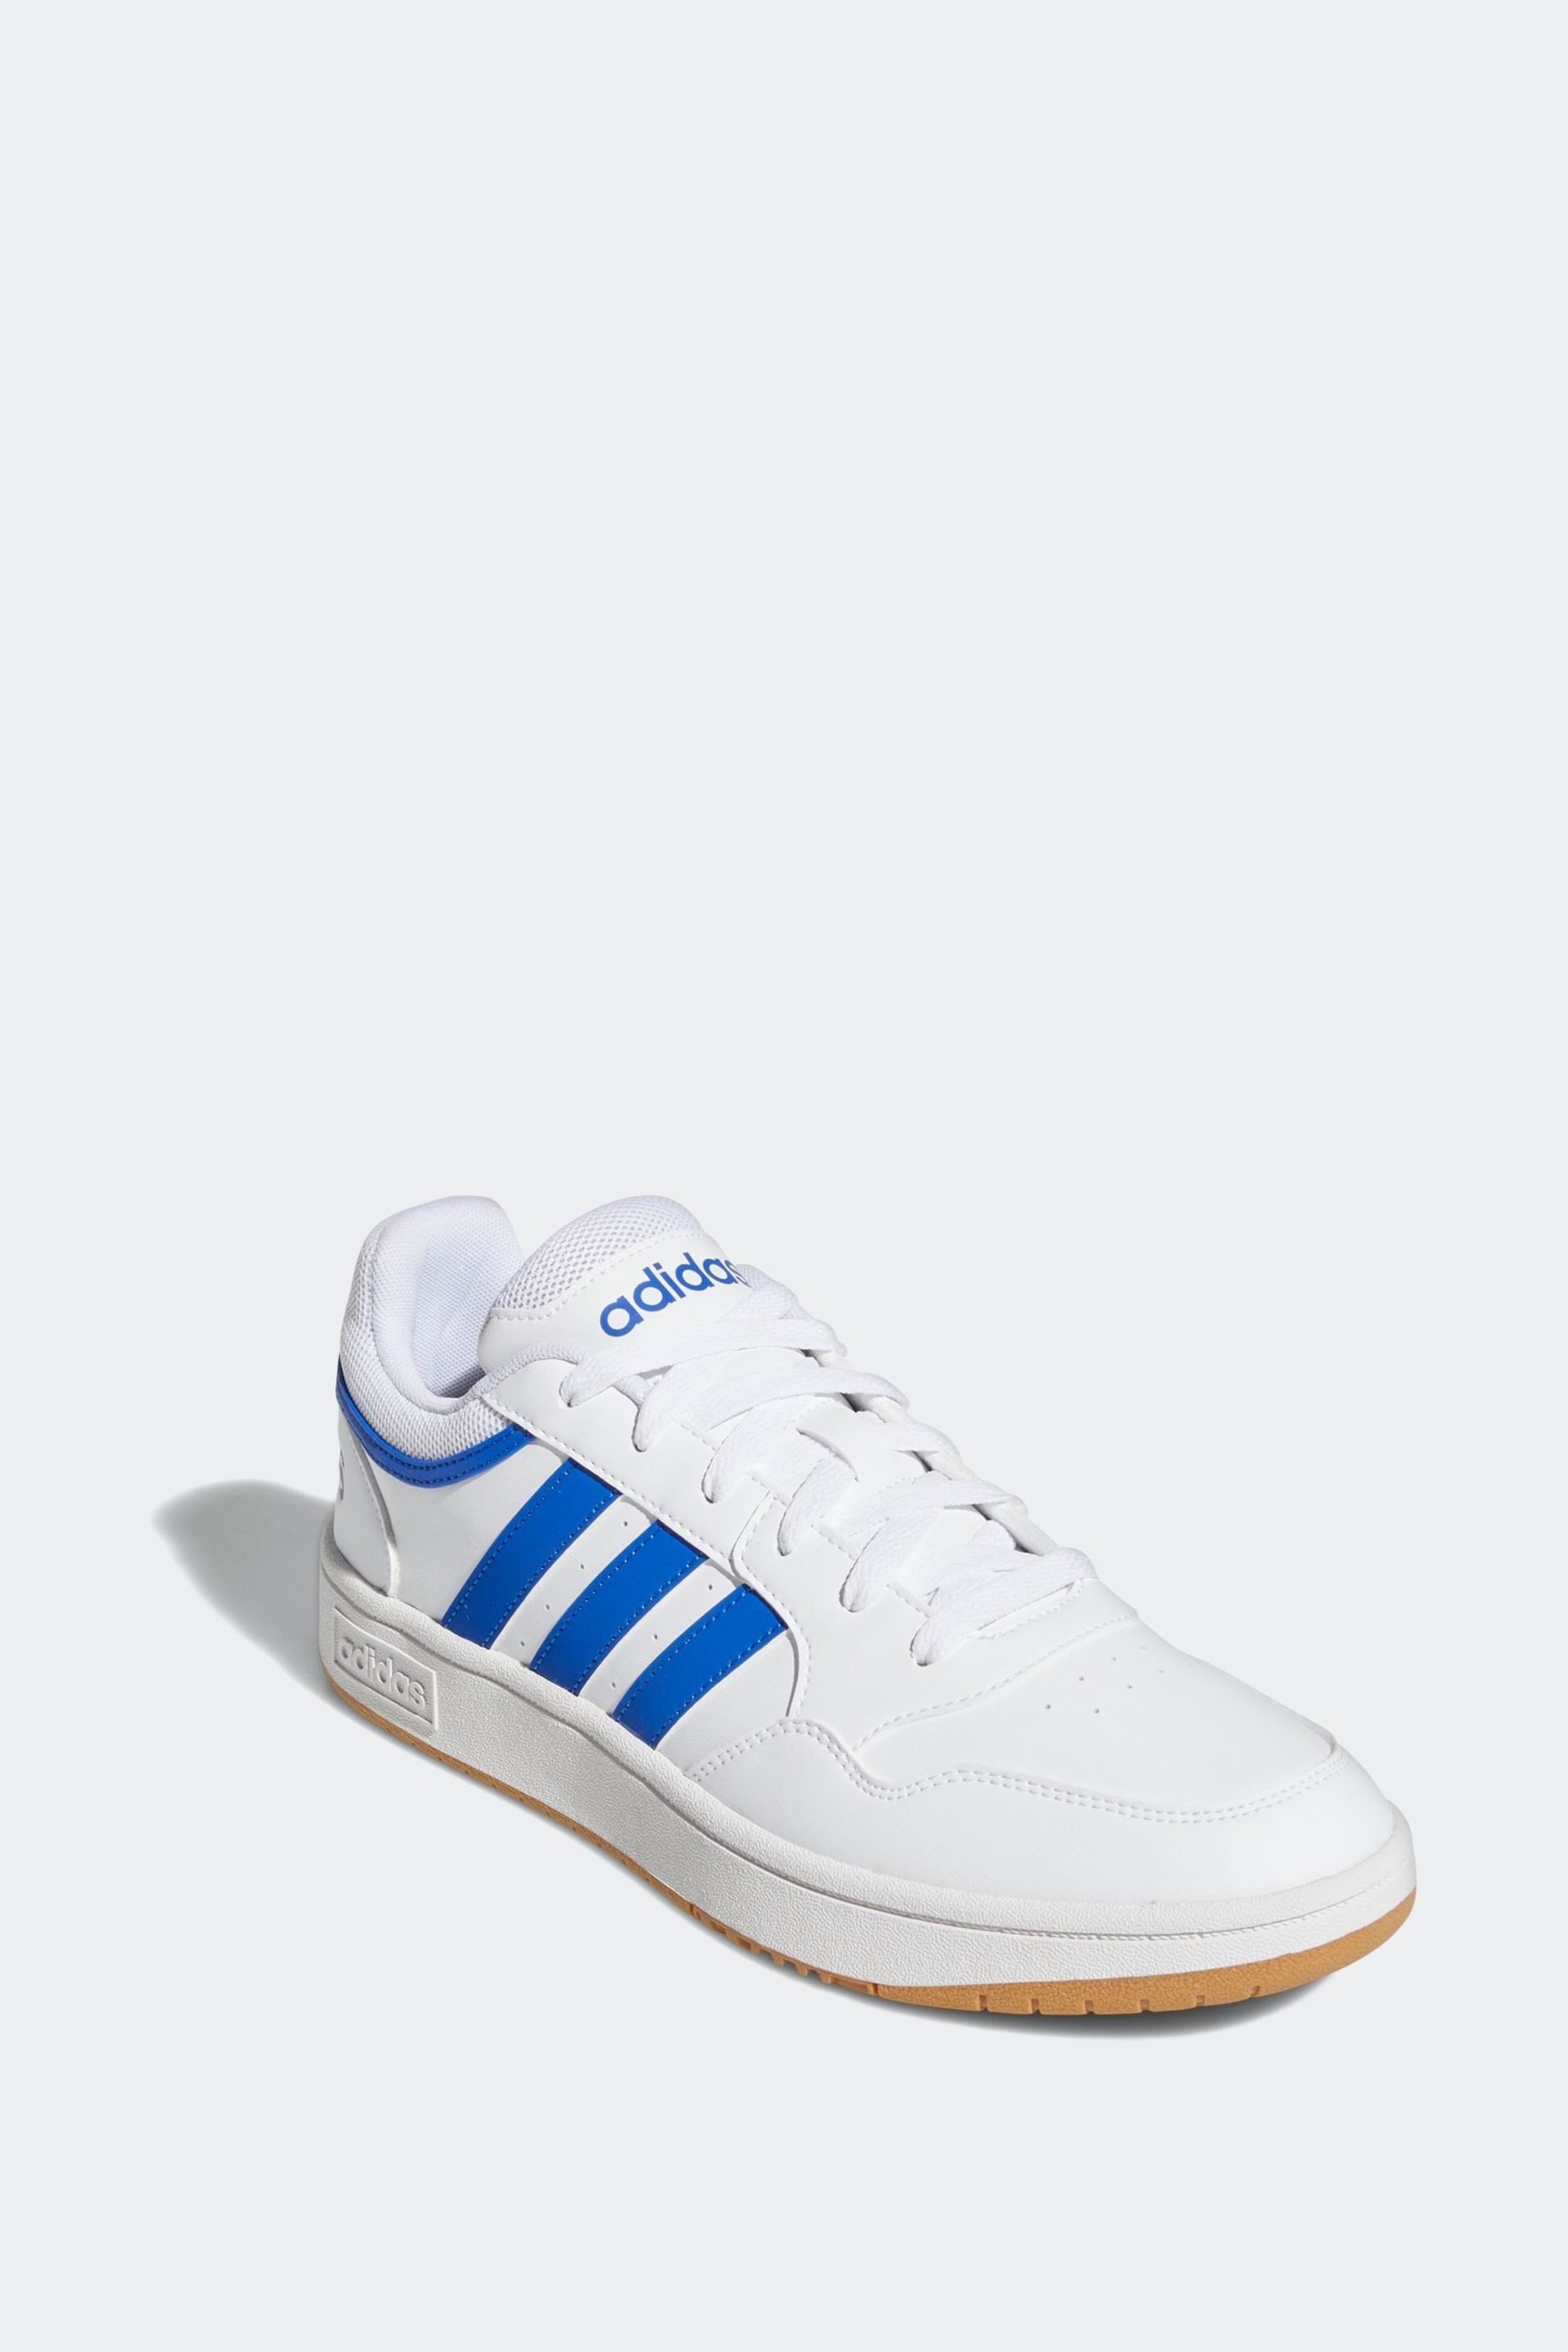 adidas White Originals Hoops 3.0 Low Classic Vintage Trainers - Image 3 of 9